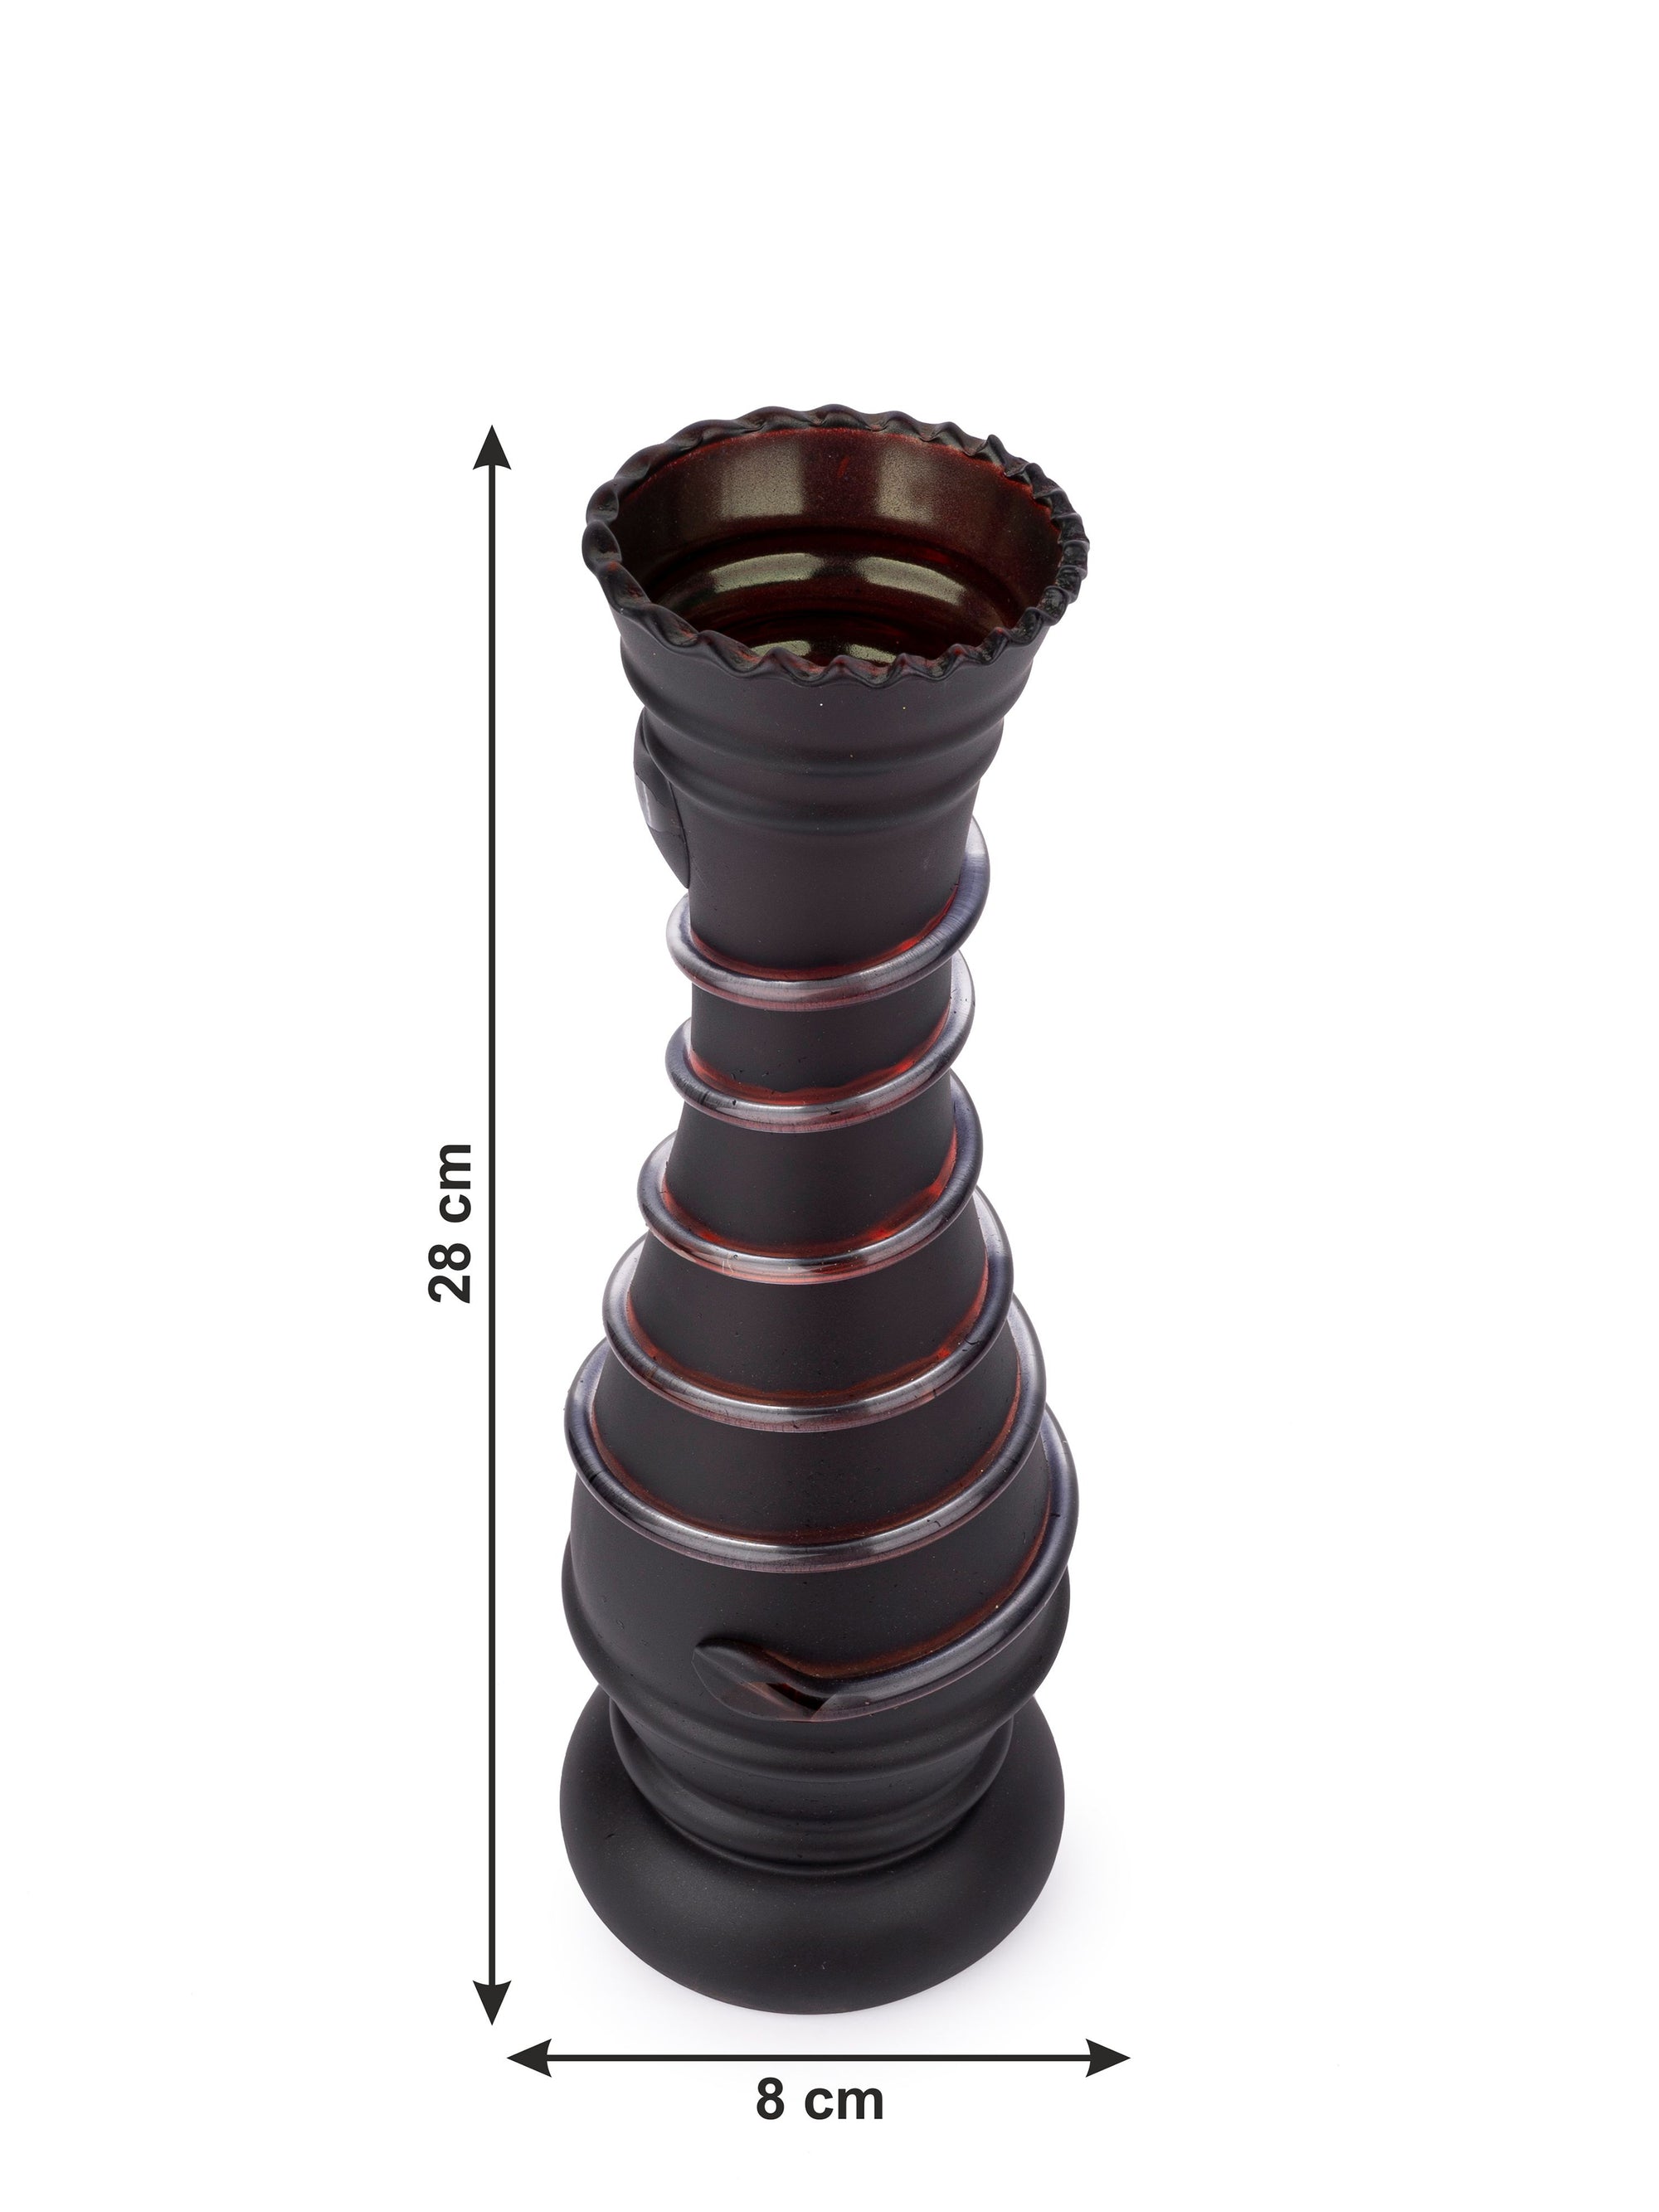 Glass Crafted Black Flower Vase with Spiral Design - 11 inches Height - The Heritage Artifacts